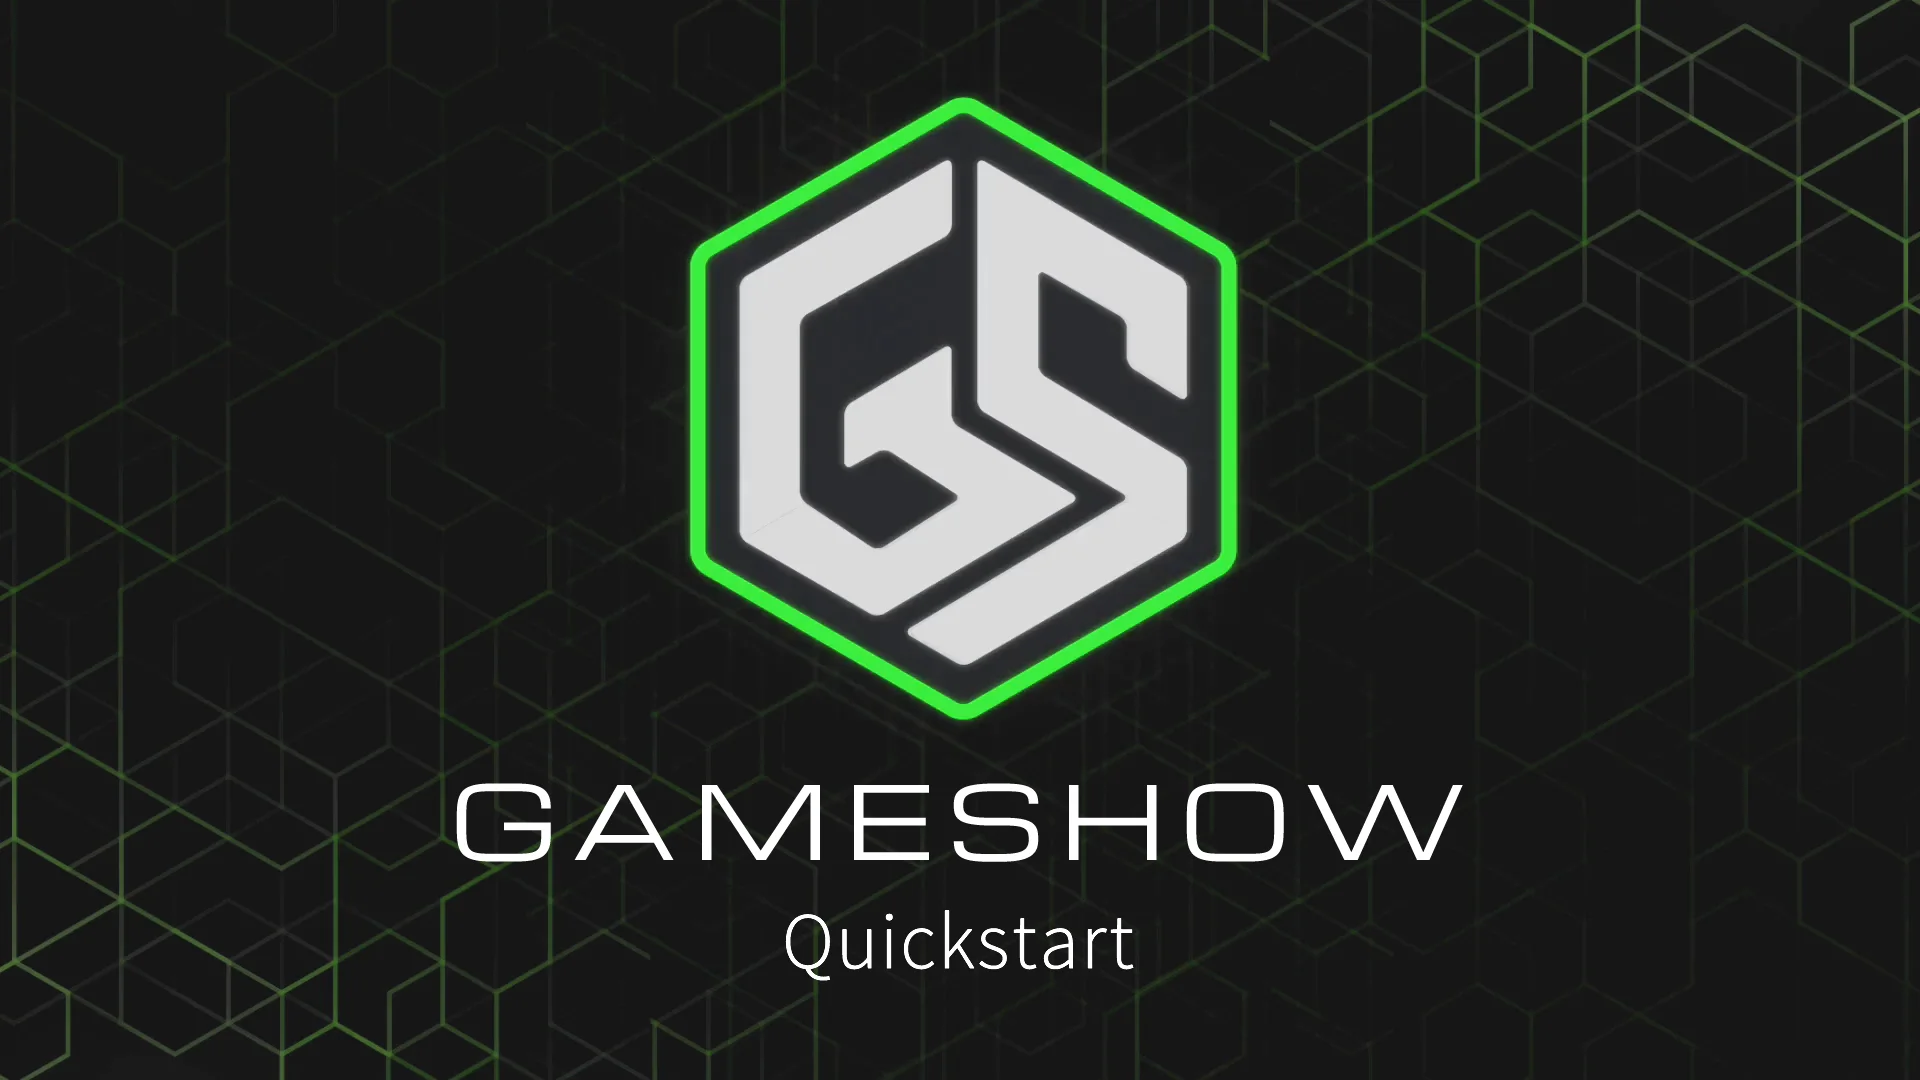 Game show. Gameshows. Game show Телеканал. Gameshows логотип. A game show is